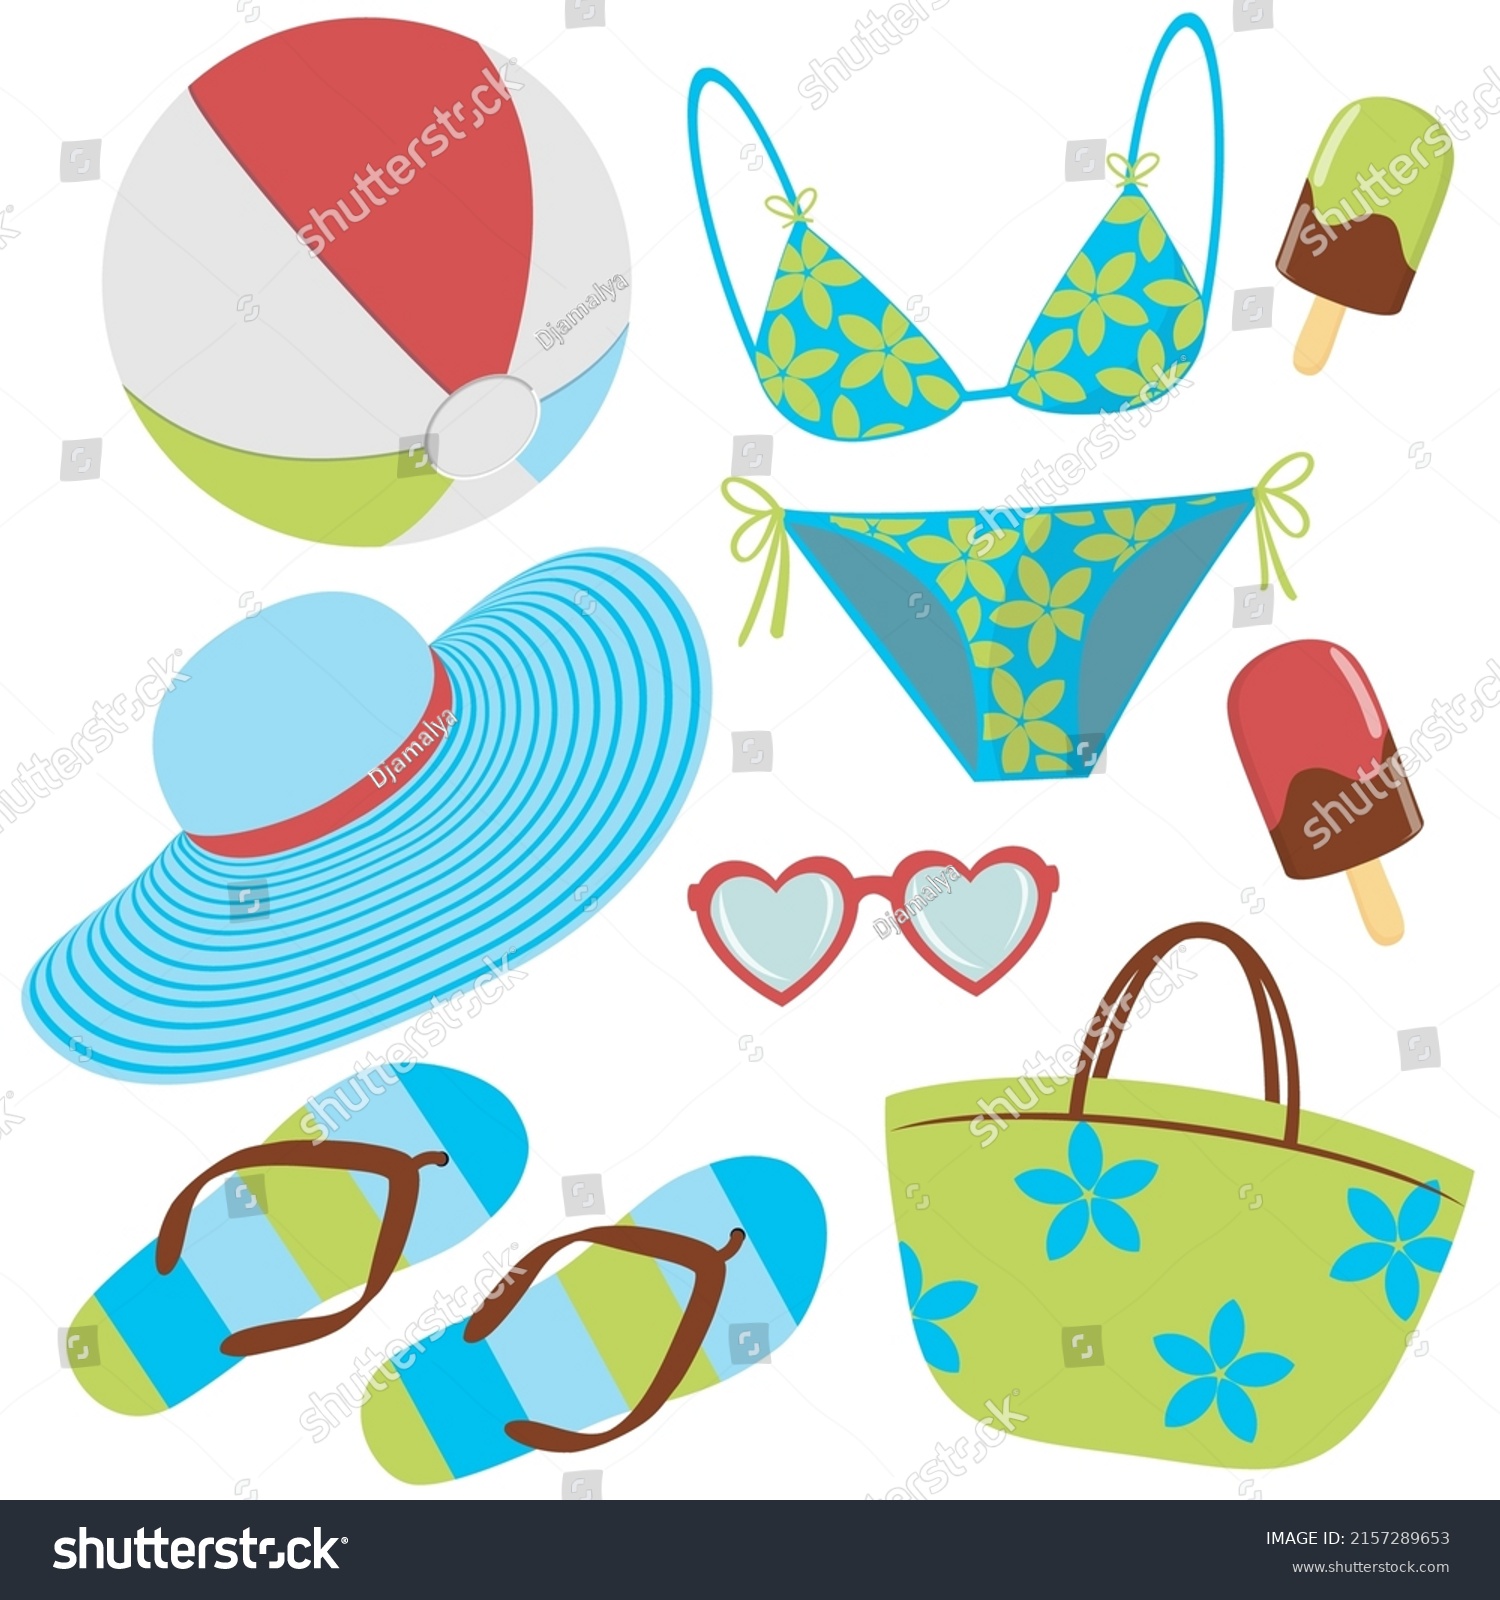 Vector Collection Beach Themed Images Stock Vector (Royalty Free ...